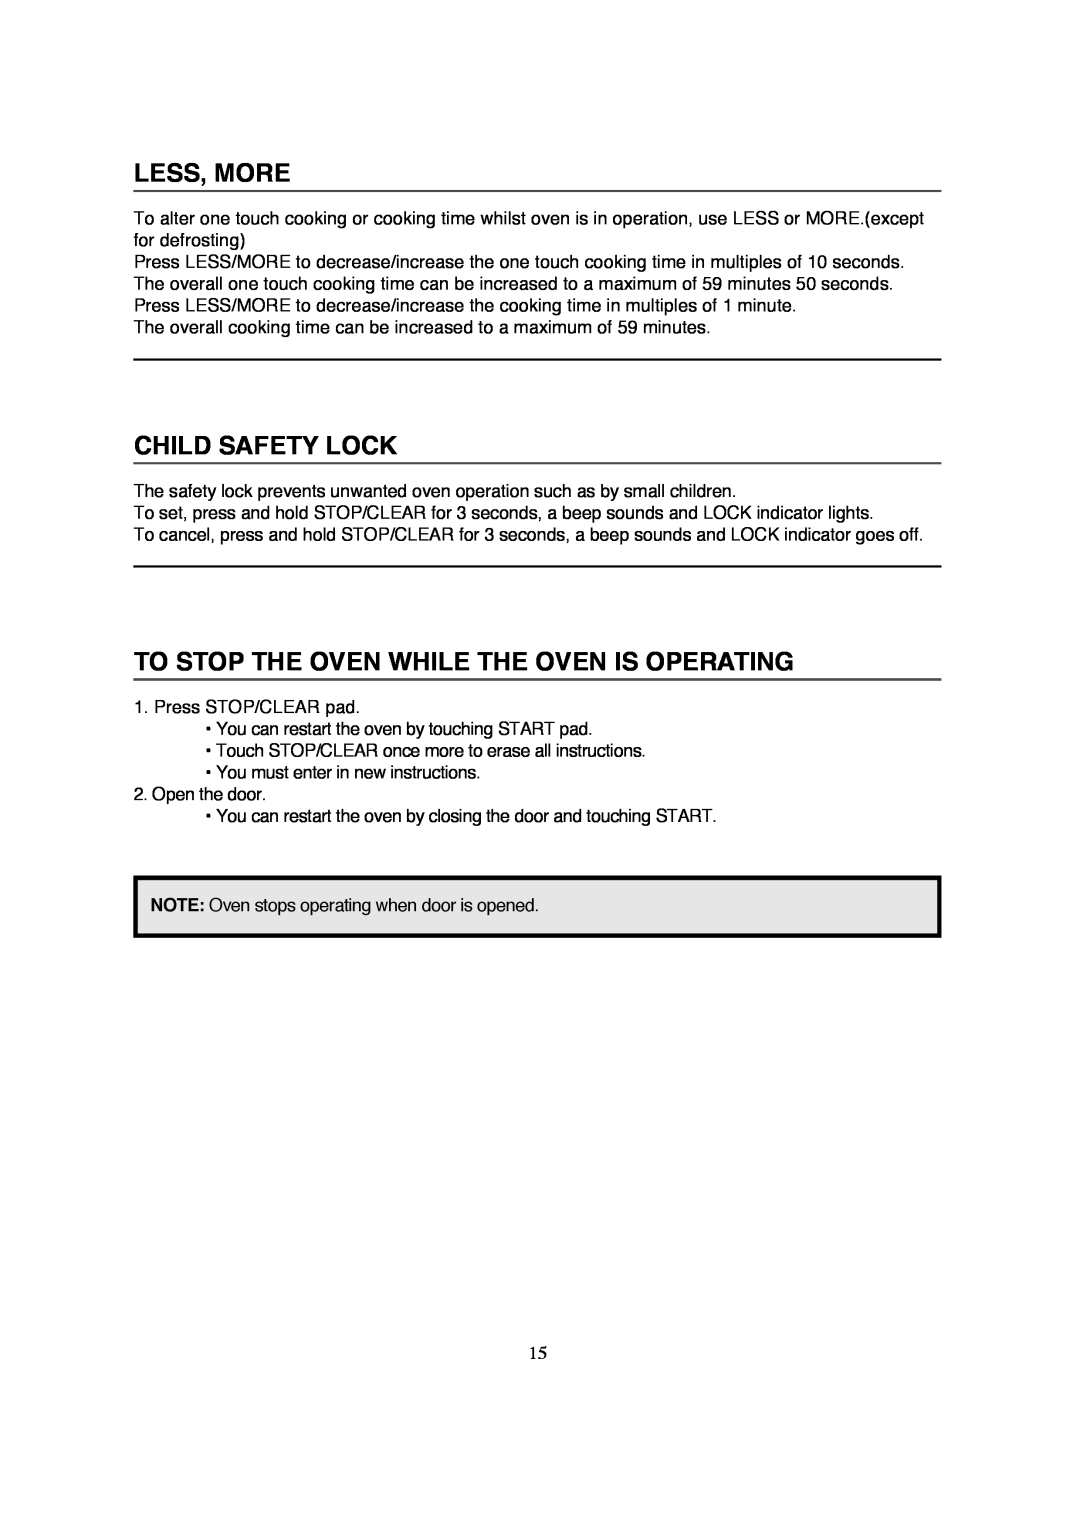 Magic Chef MCB770B instruction manual Less, More, Child Safety Lock, To Stop The Oven While The Oven Is Operating 